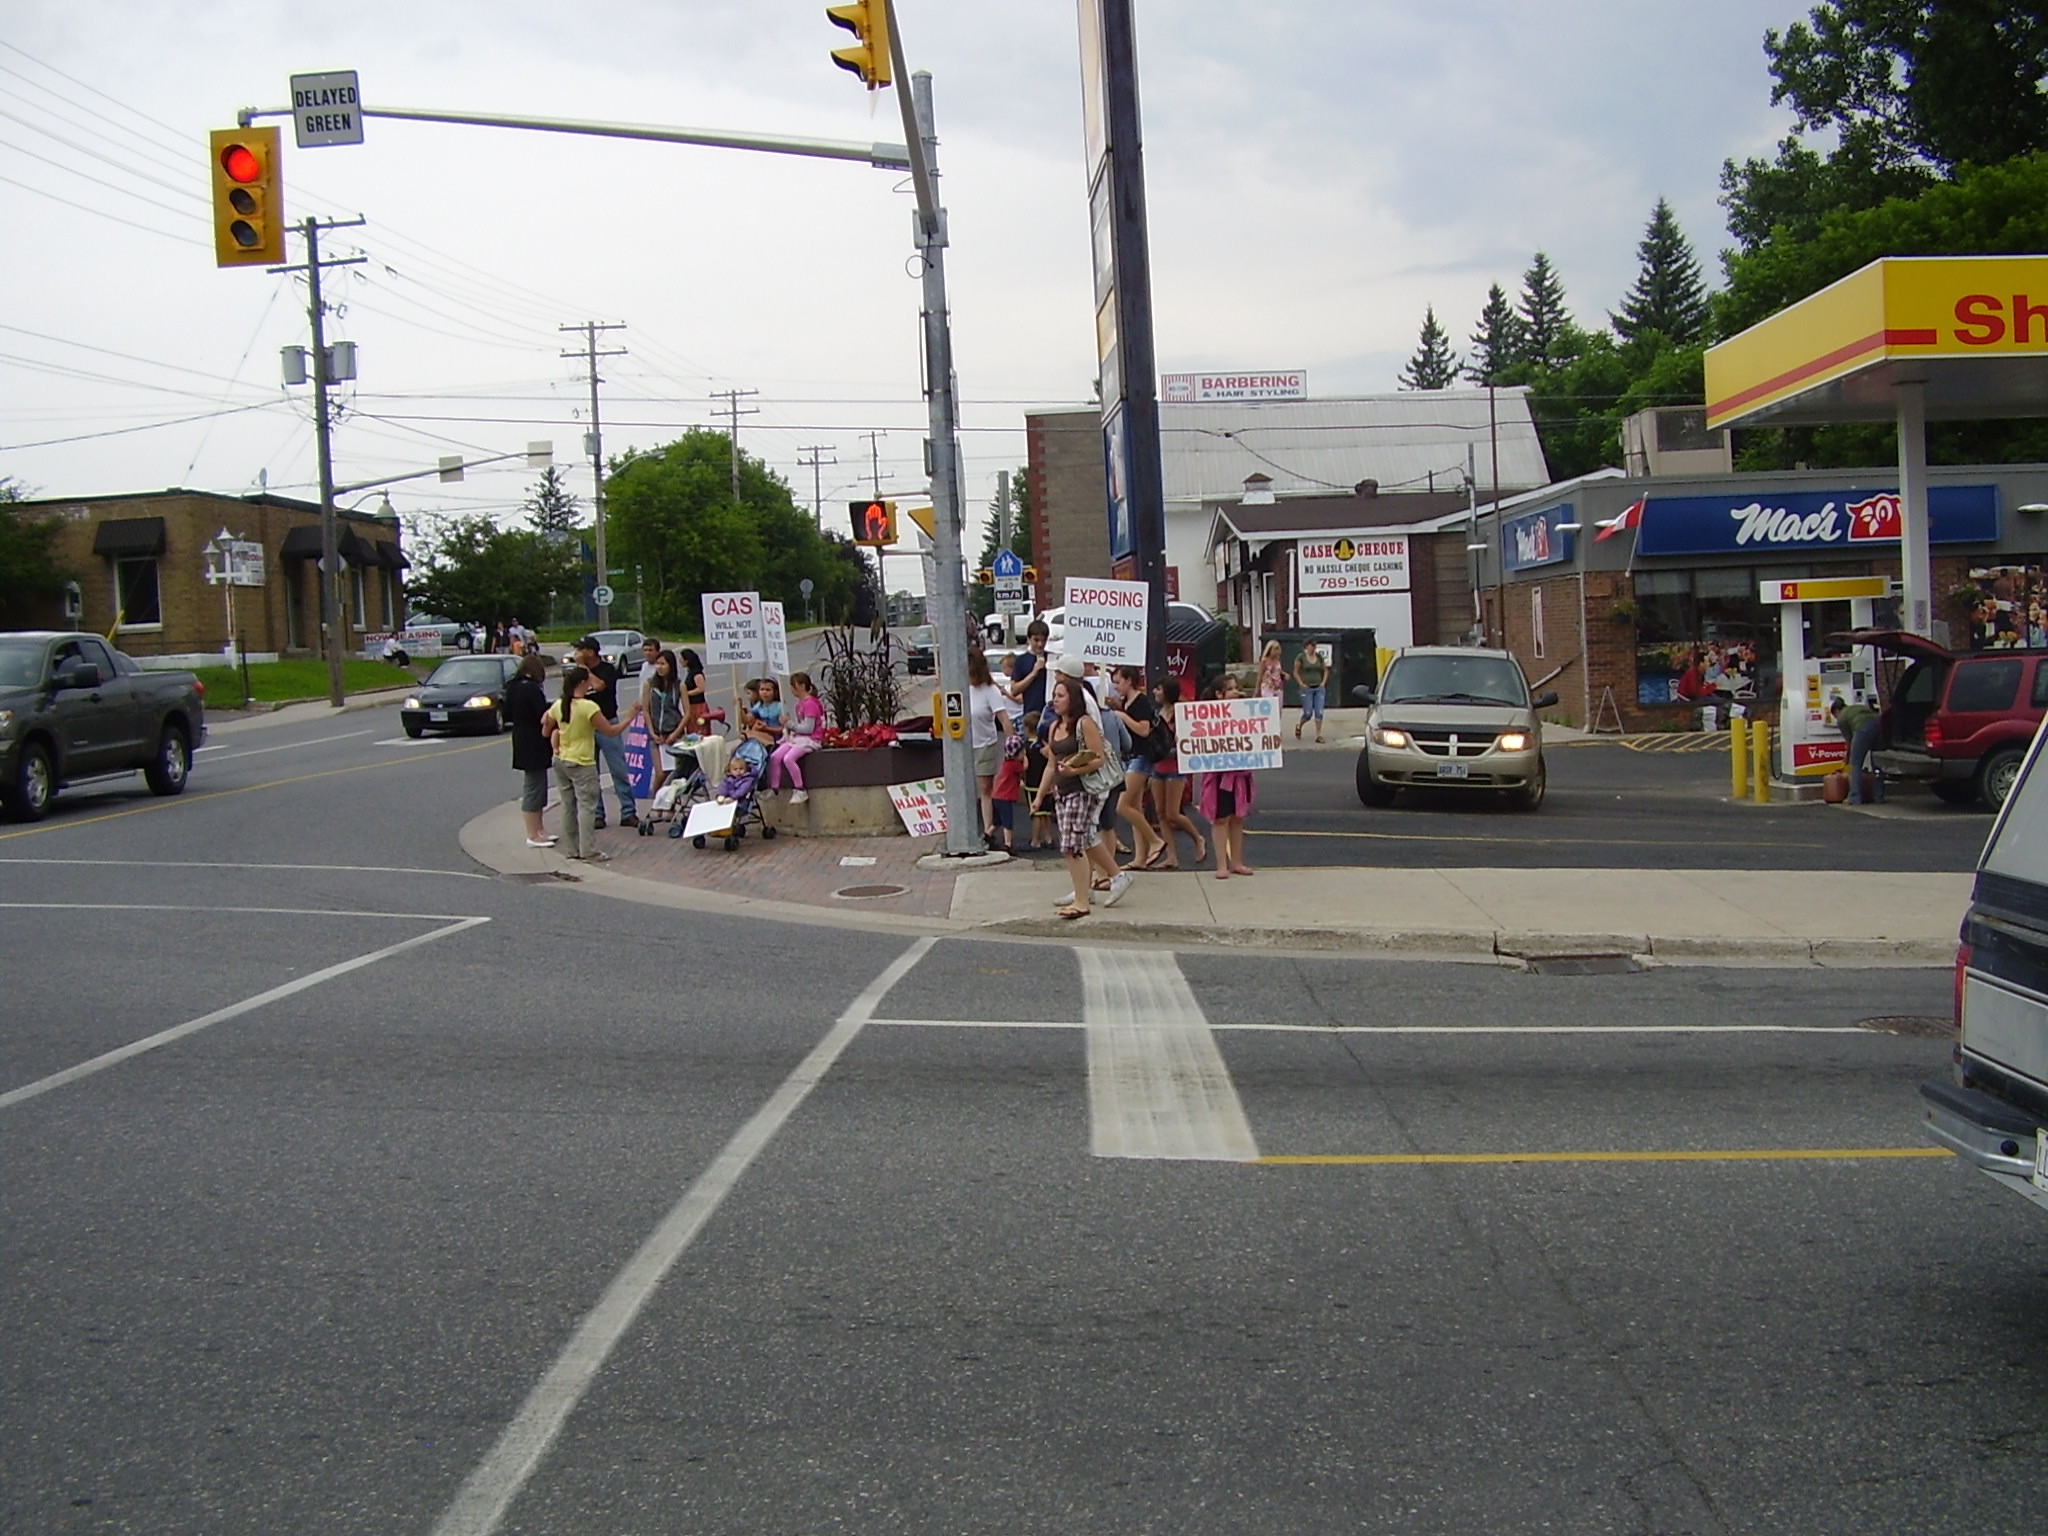 Honk to support children's aid oversight